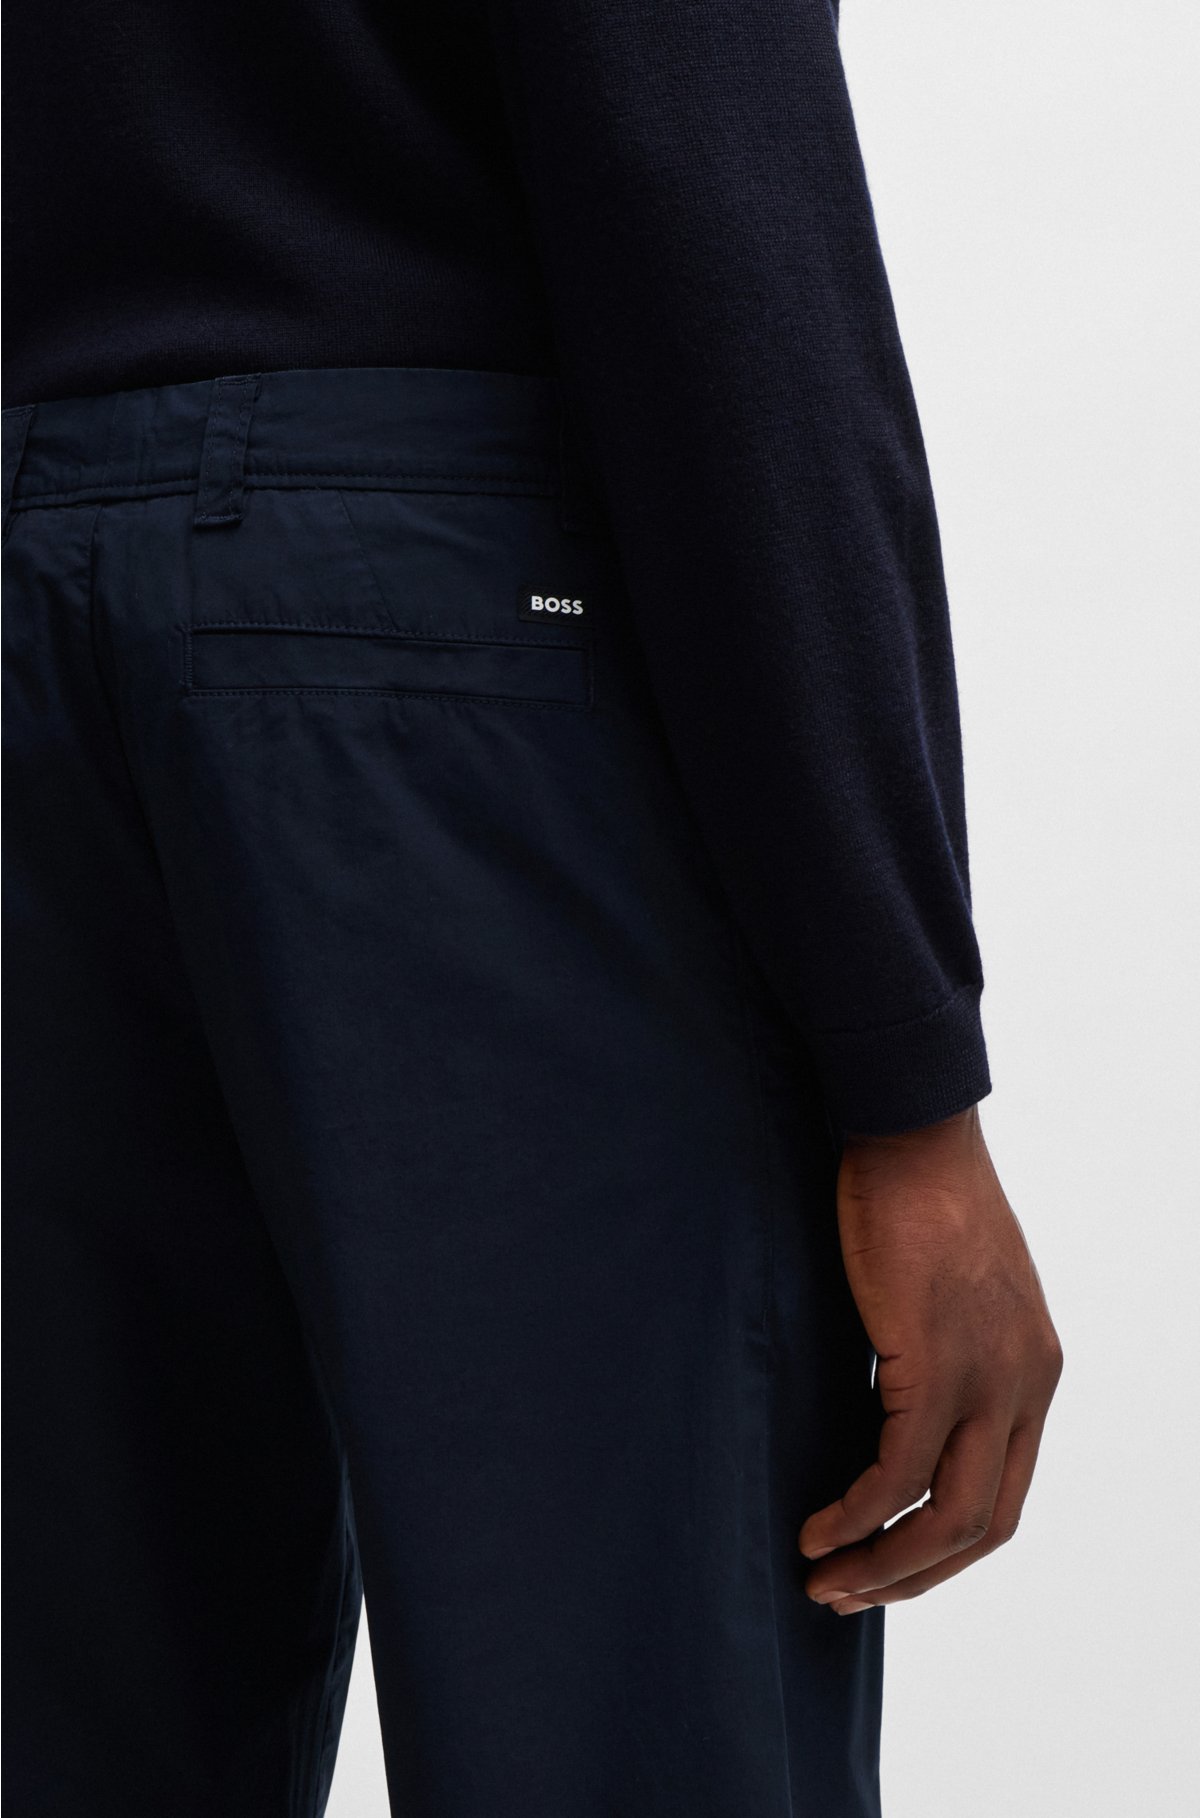 Relaxed-fit trousers in stretch-cotton poplin, Dark Blue